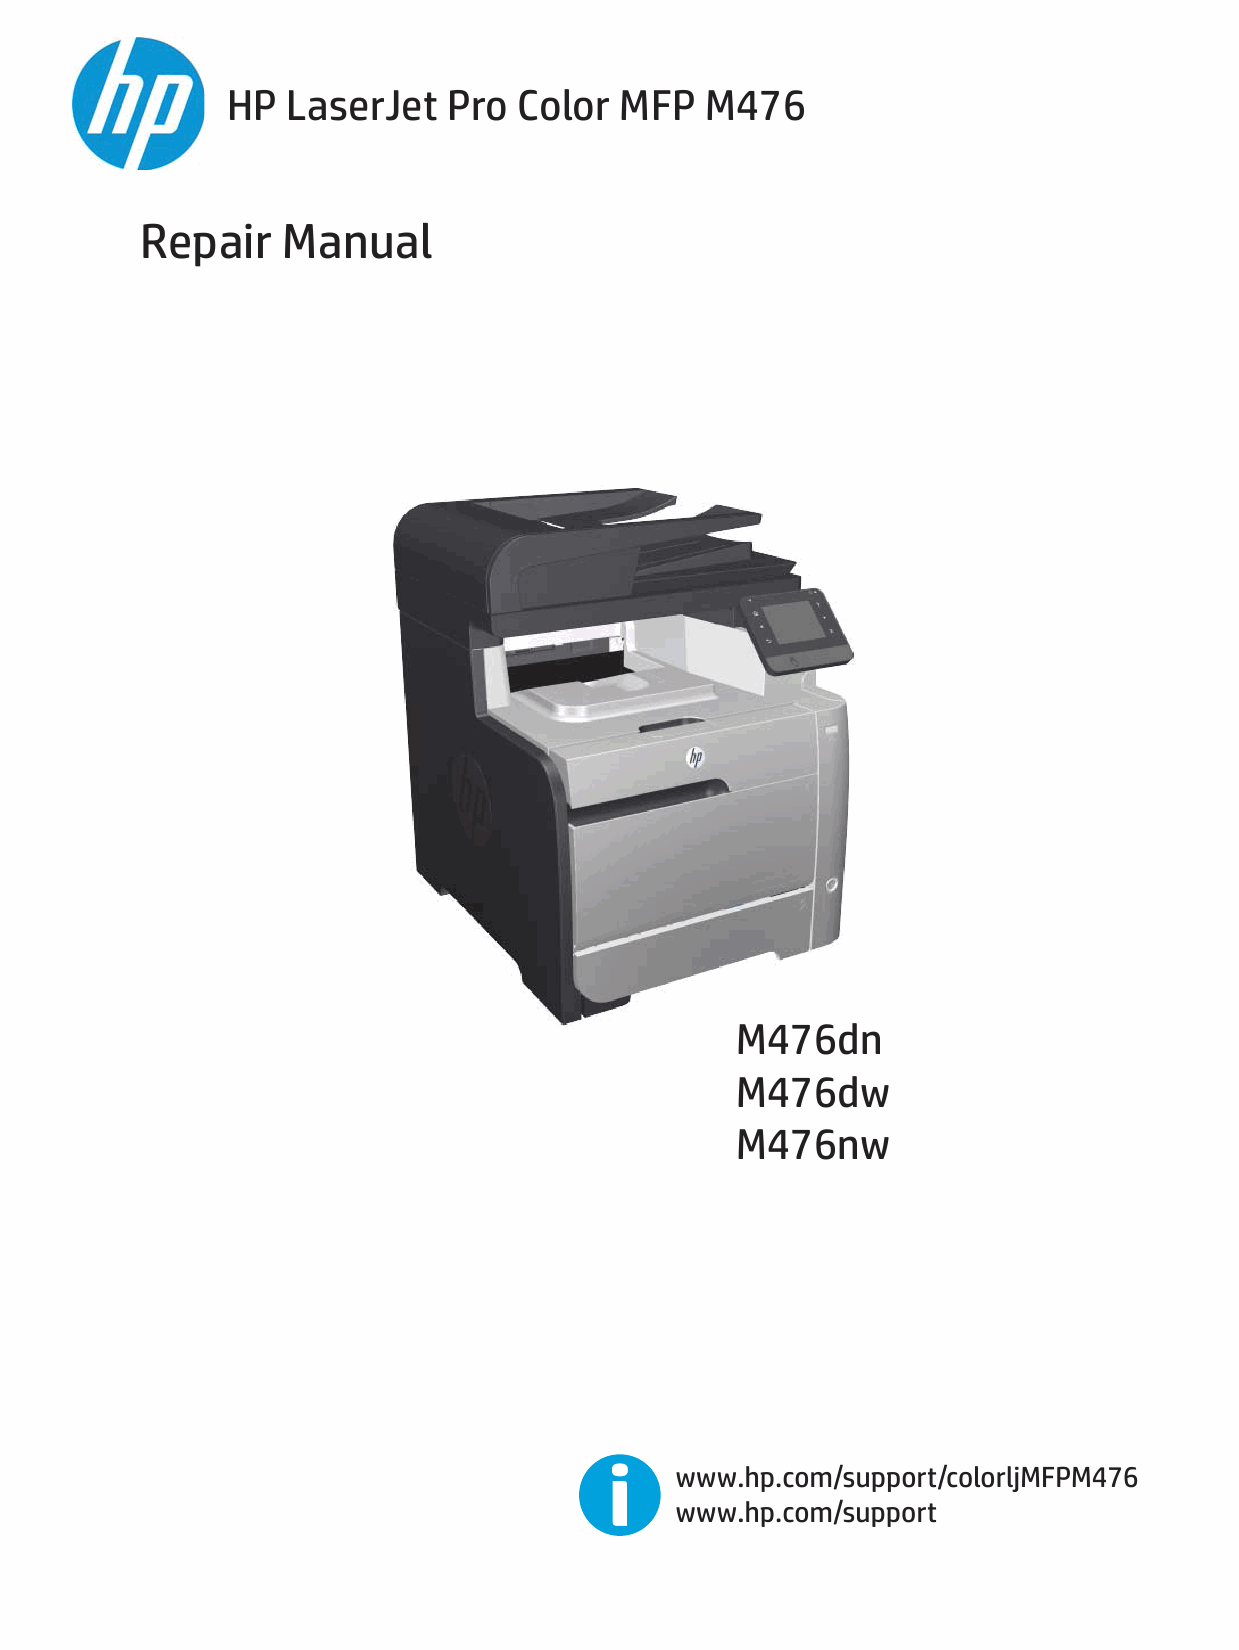 HP ColorLaserJet Pro-MFP M476 dn dw nw Parts and Repair Guide PDF download-1